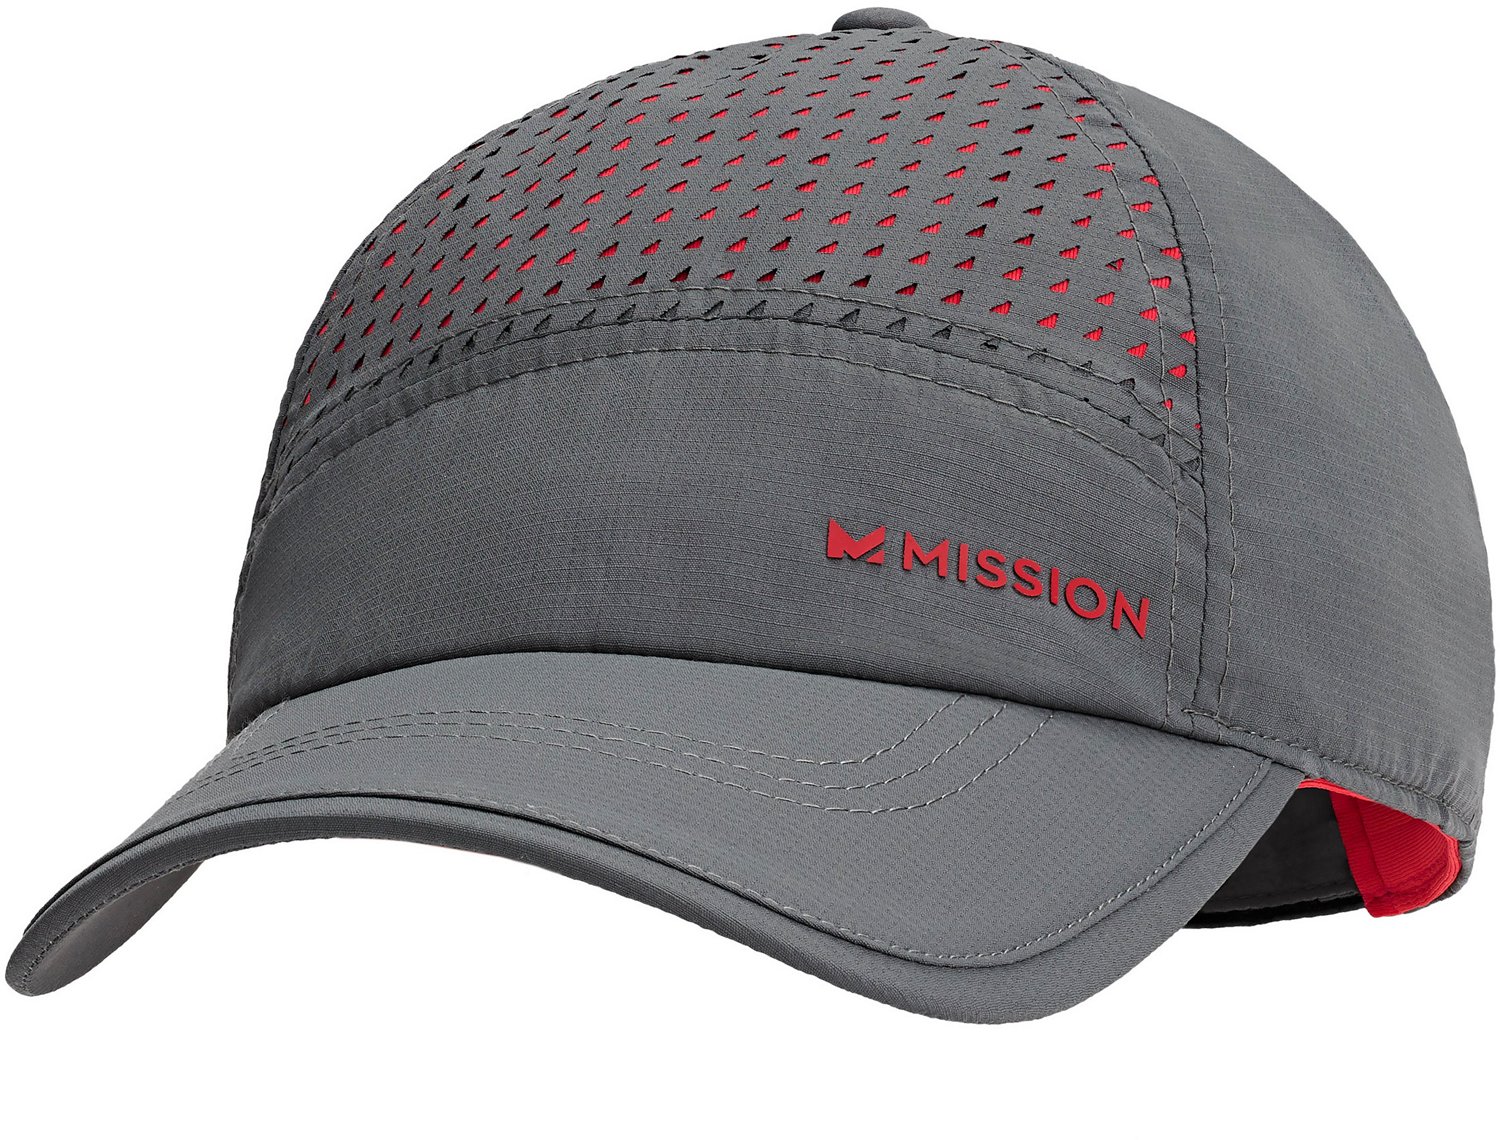 MISSION Cooling Performance Hat - Unisex Baseball Cap for Men and